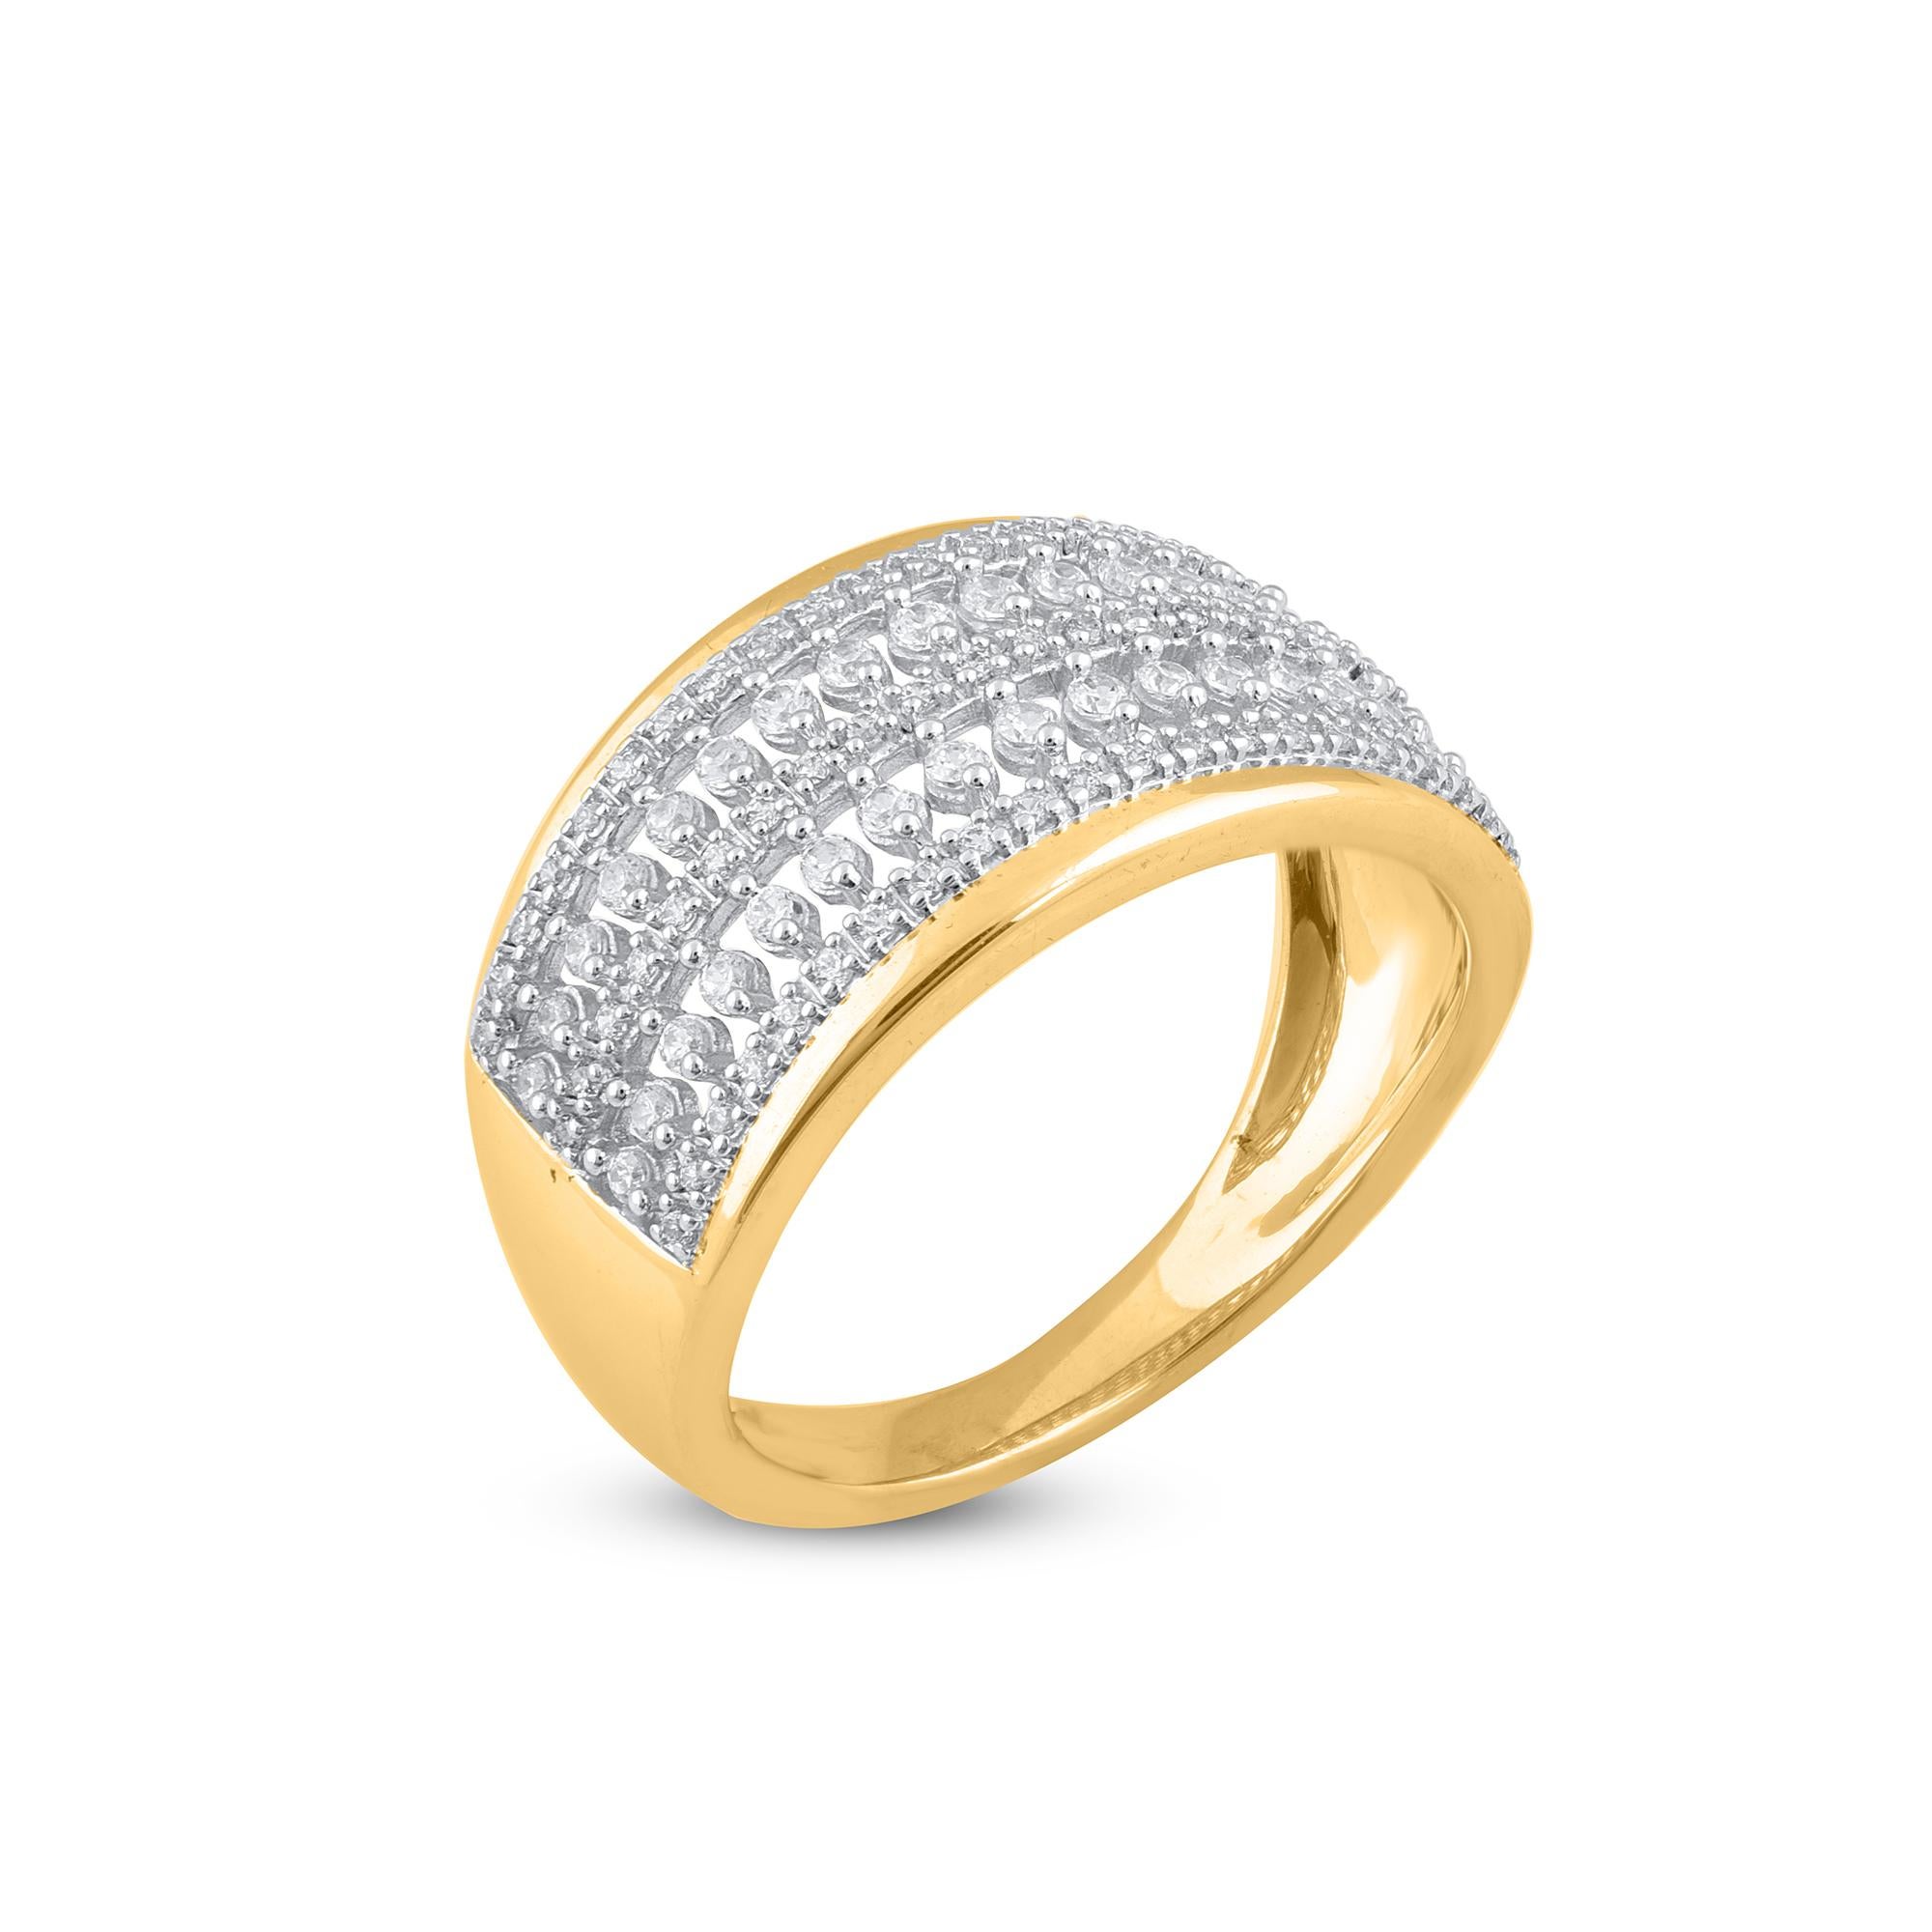 Bring charm to your look with this diamond ring. The ring is crafted from 14-karat gold in your choice of white, rose, or yellow, and features Round Brilliant 97 white diamonds, Micro Prong & Prong set, H-I color I2 clarity and a high polish finish